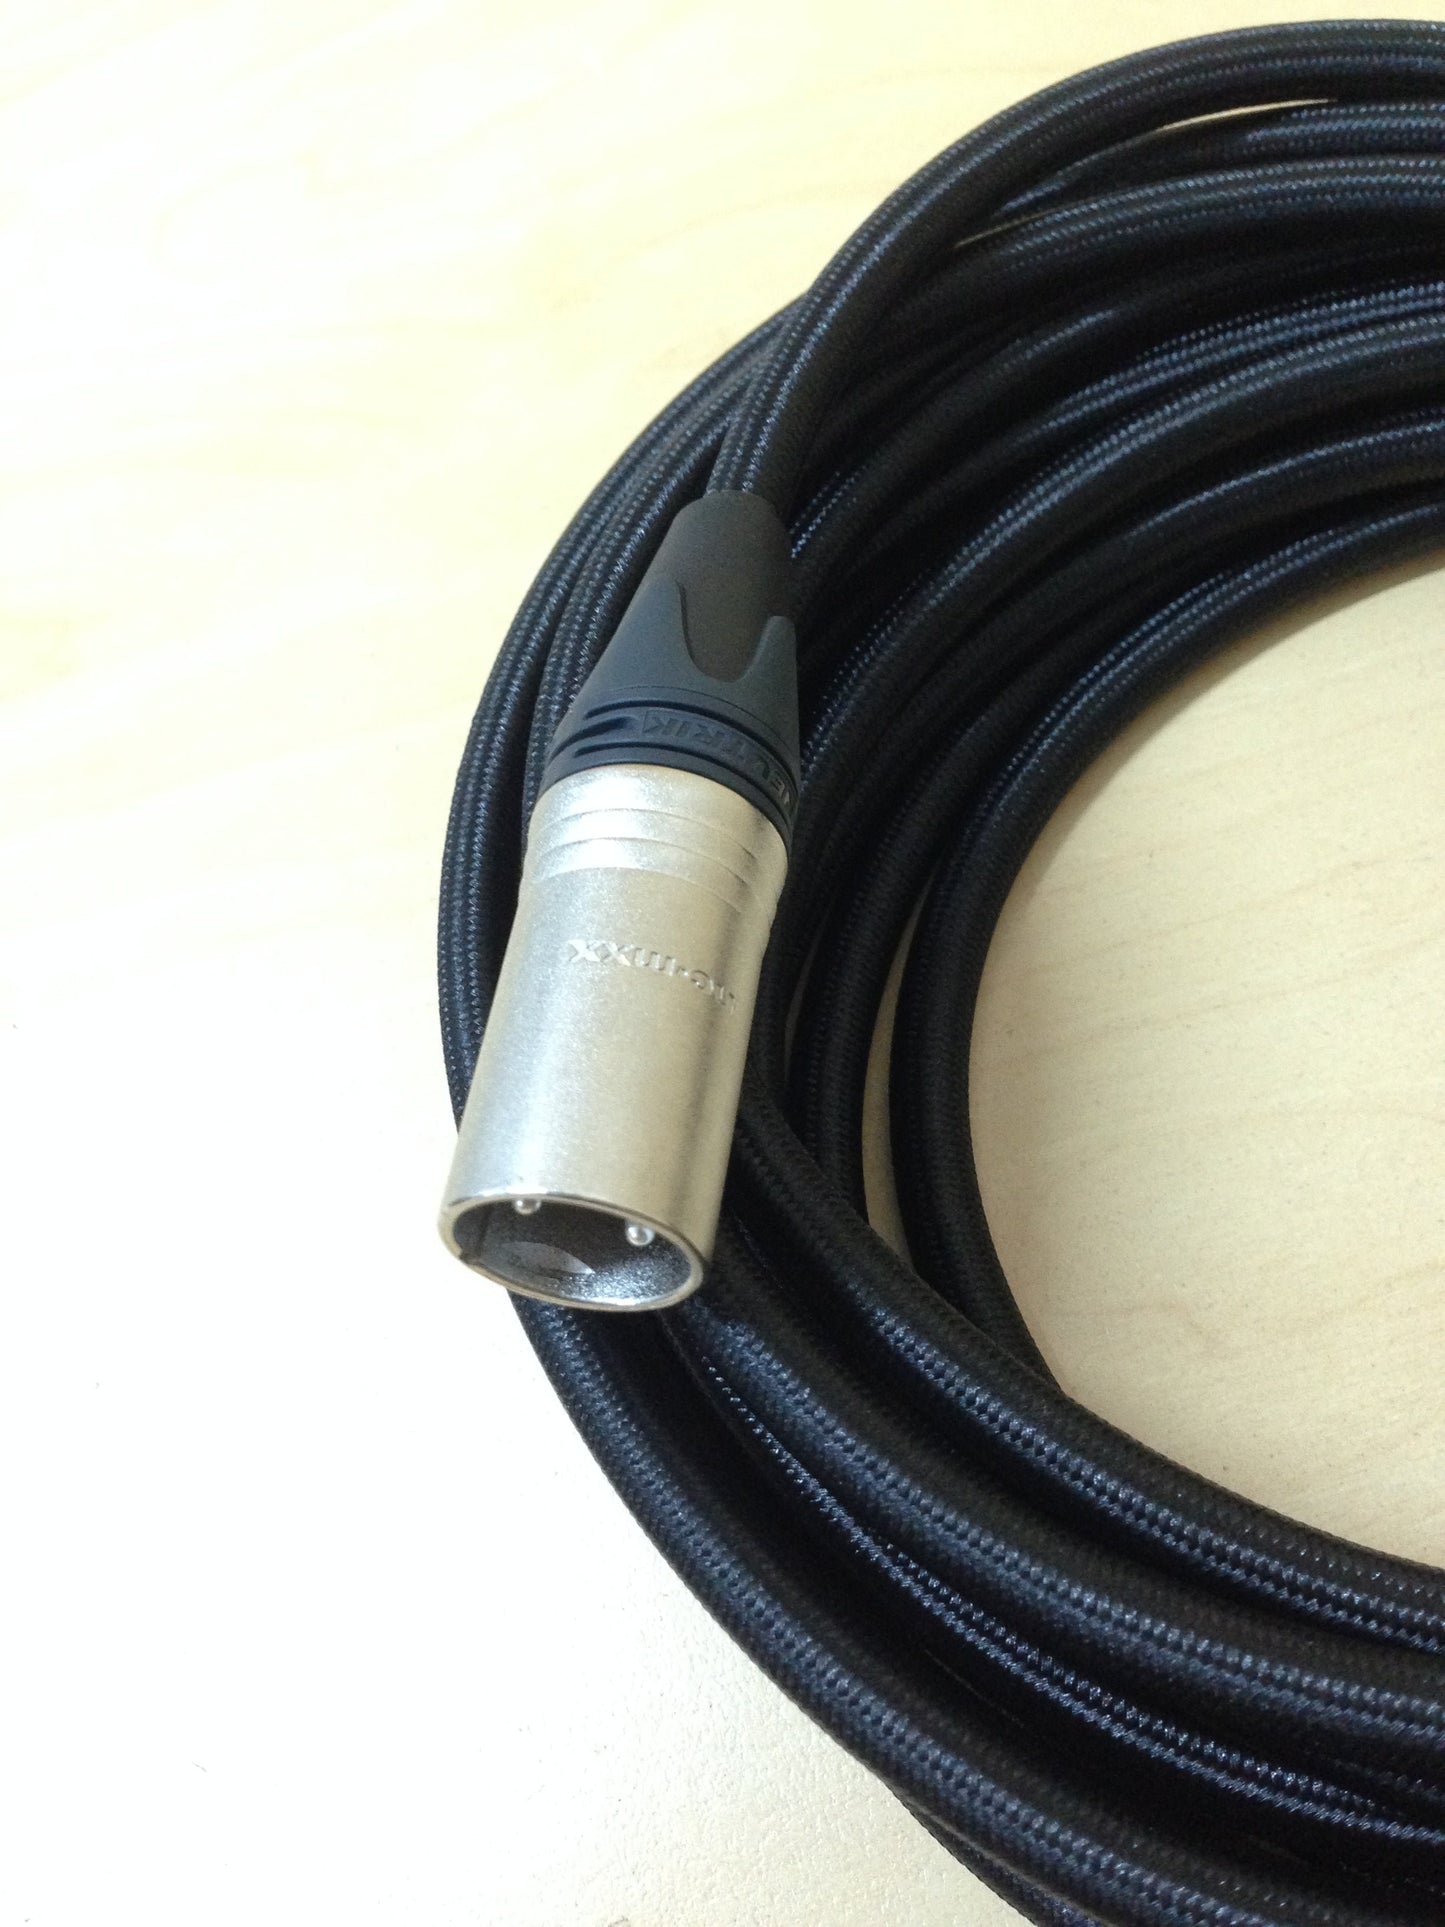 BoxKing OCC Microphone Cable/Lead,XLR-XLR,20FT(6M),3 Pin,All Silver Plated,Black